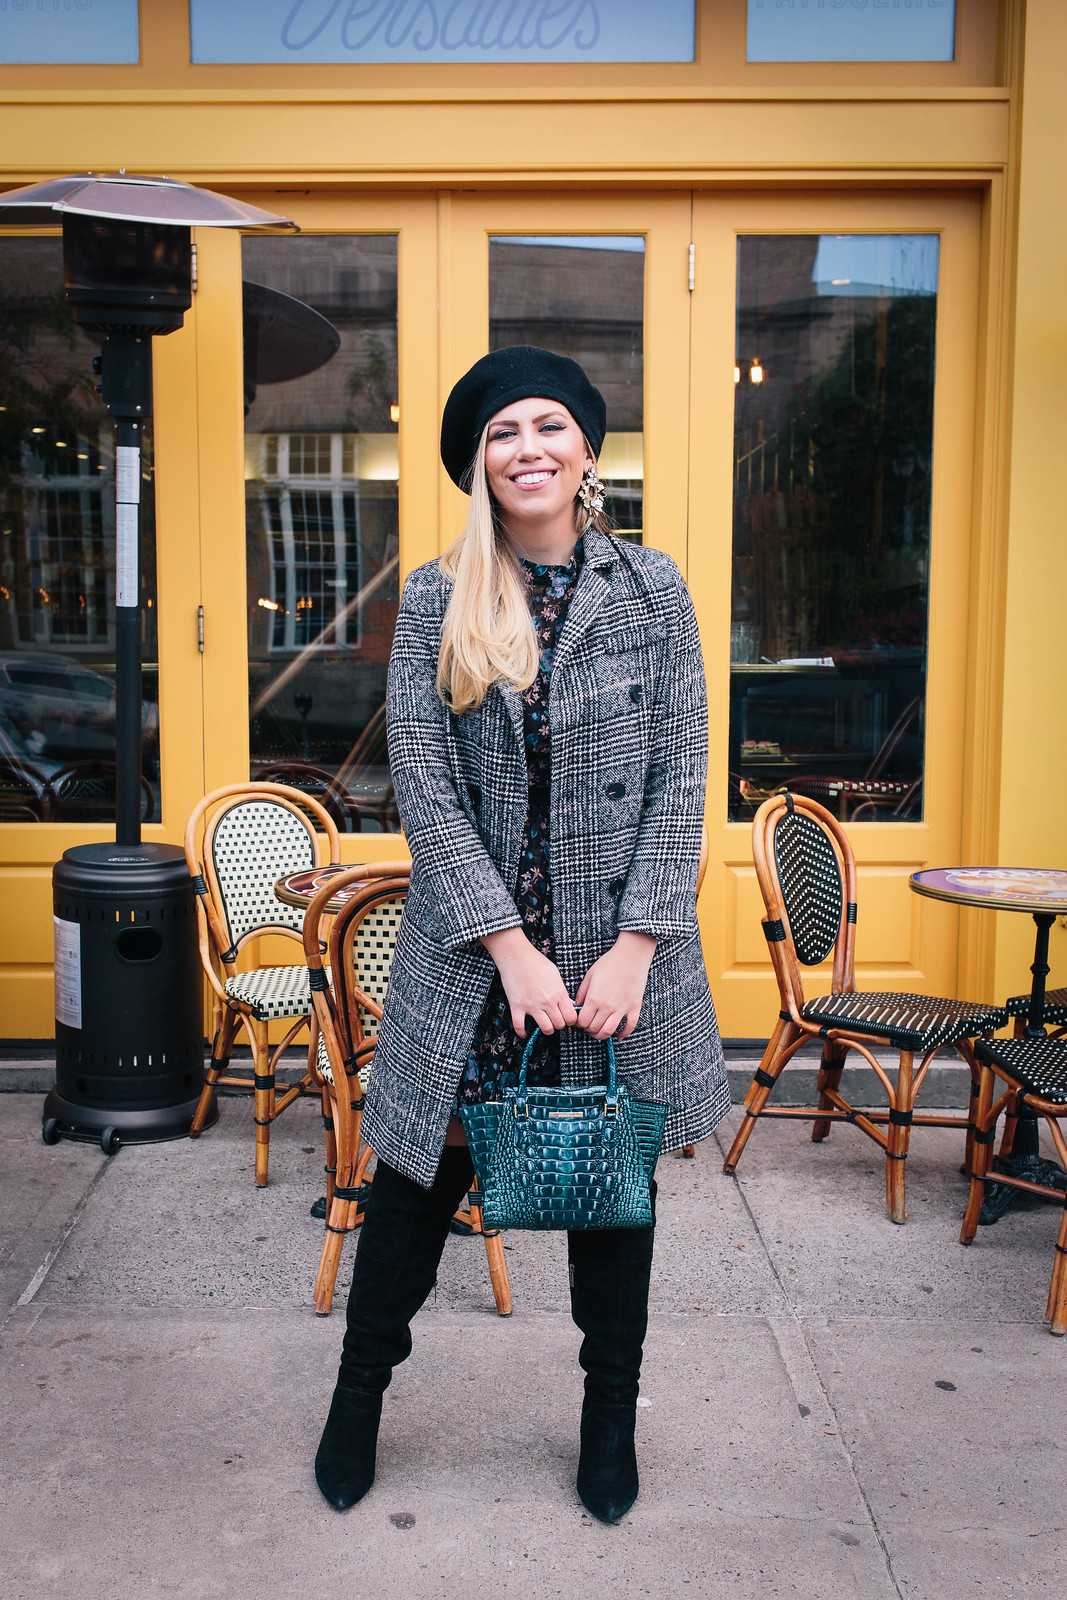 My Favorite Non-Traditional Holiday Outfit | Brahmin Mini Priscilla Melbourne Bag Plaid Coat